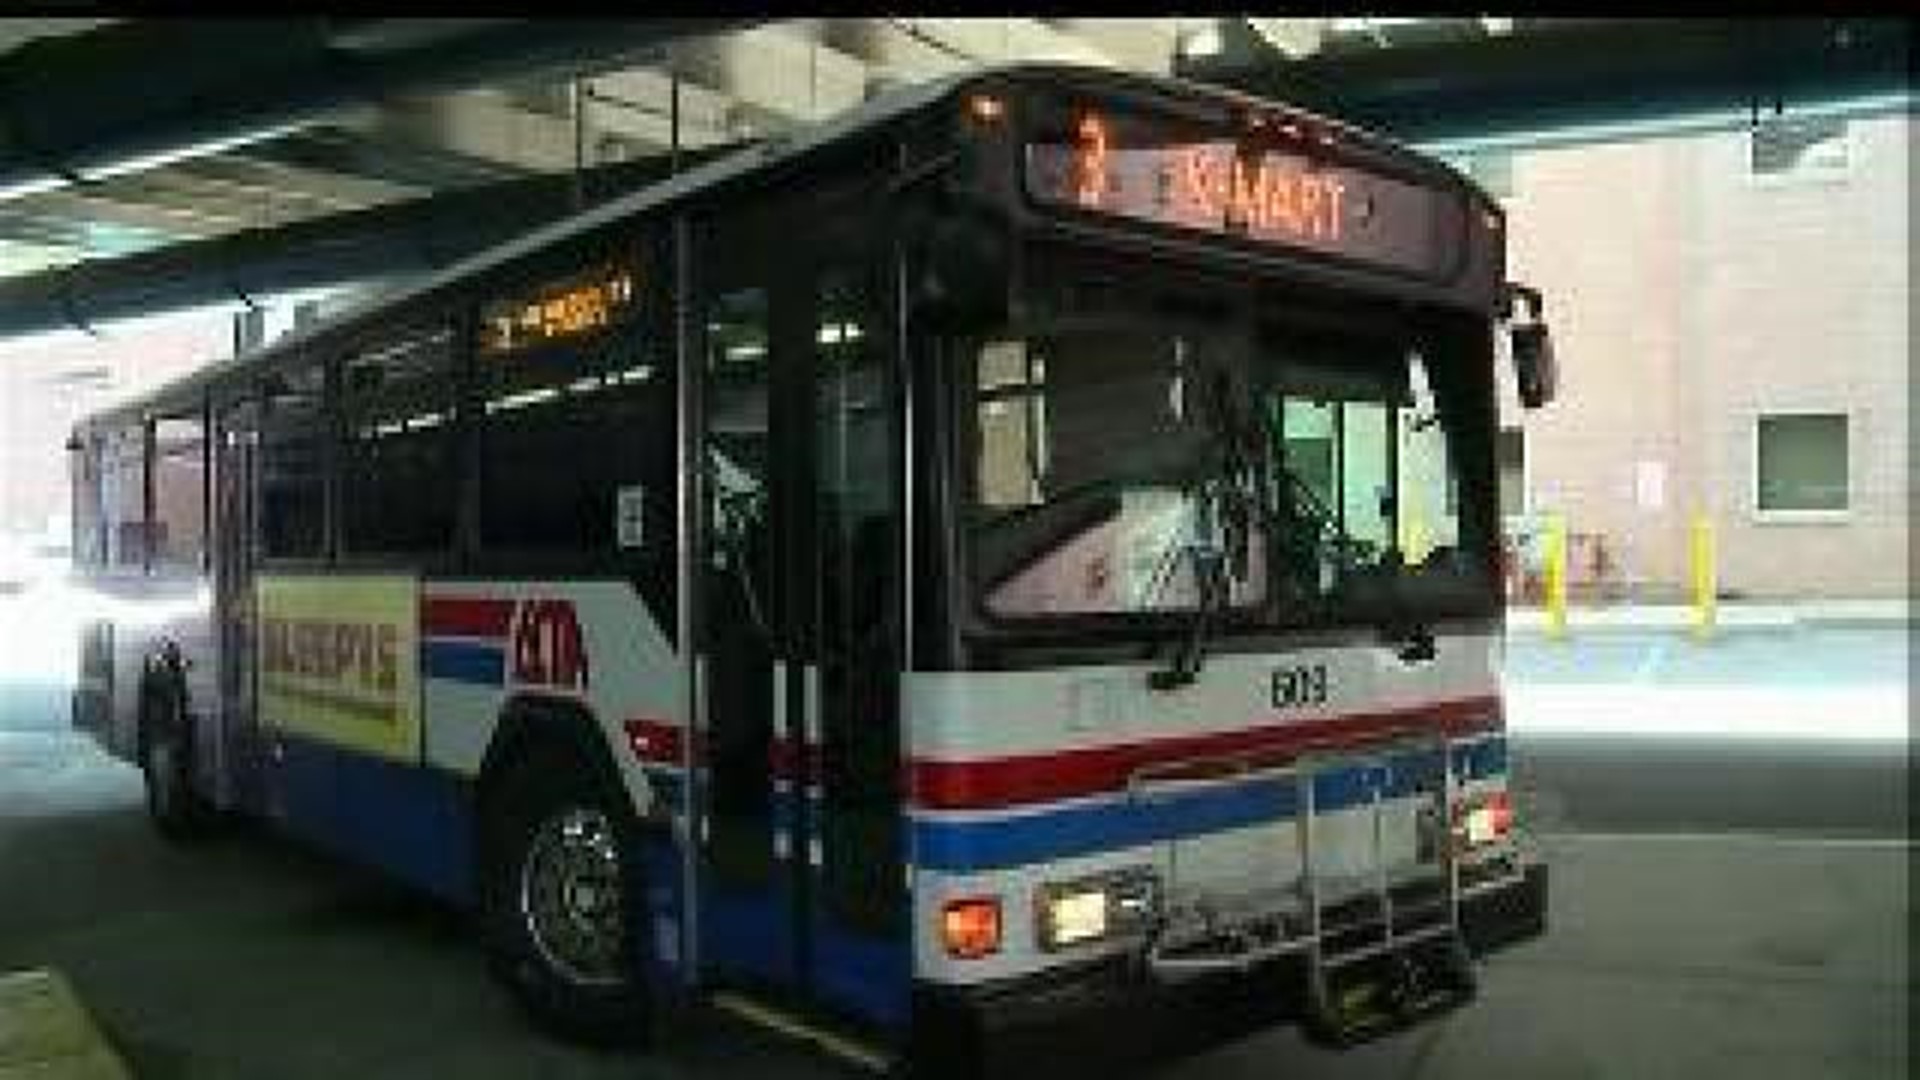 UPDATE: LCTA Bus Drivers Testify At Hearing